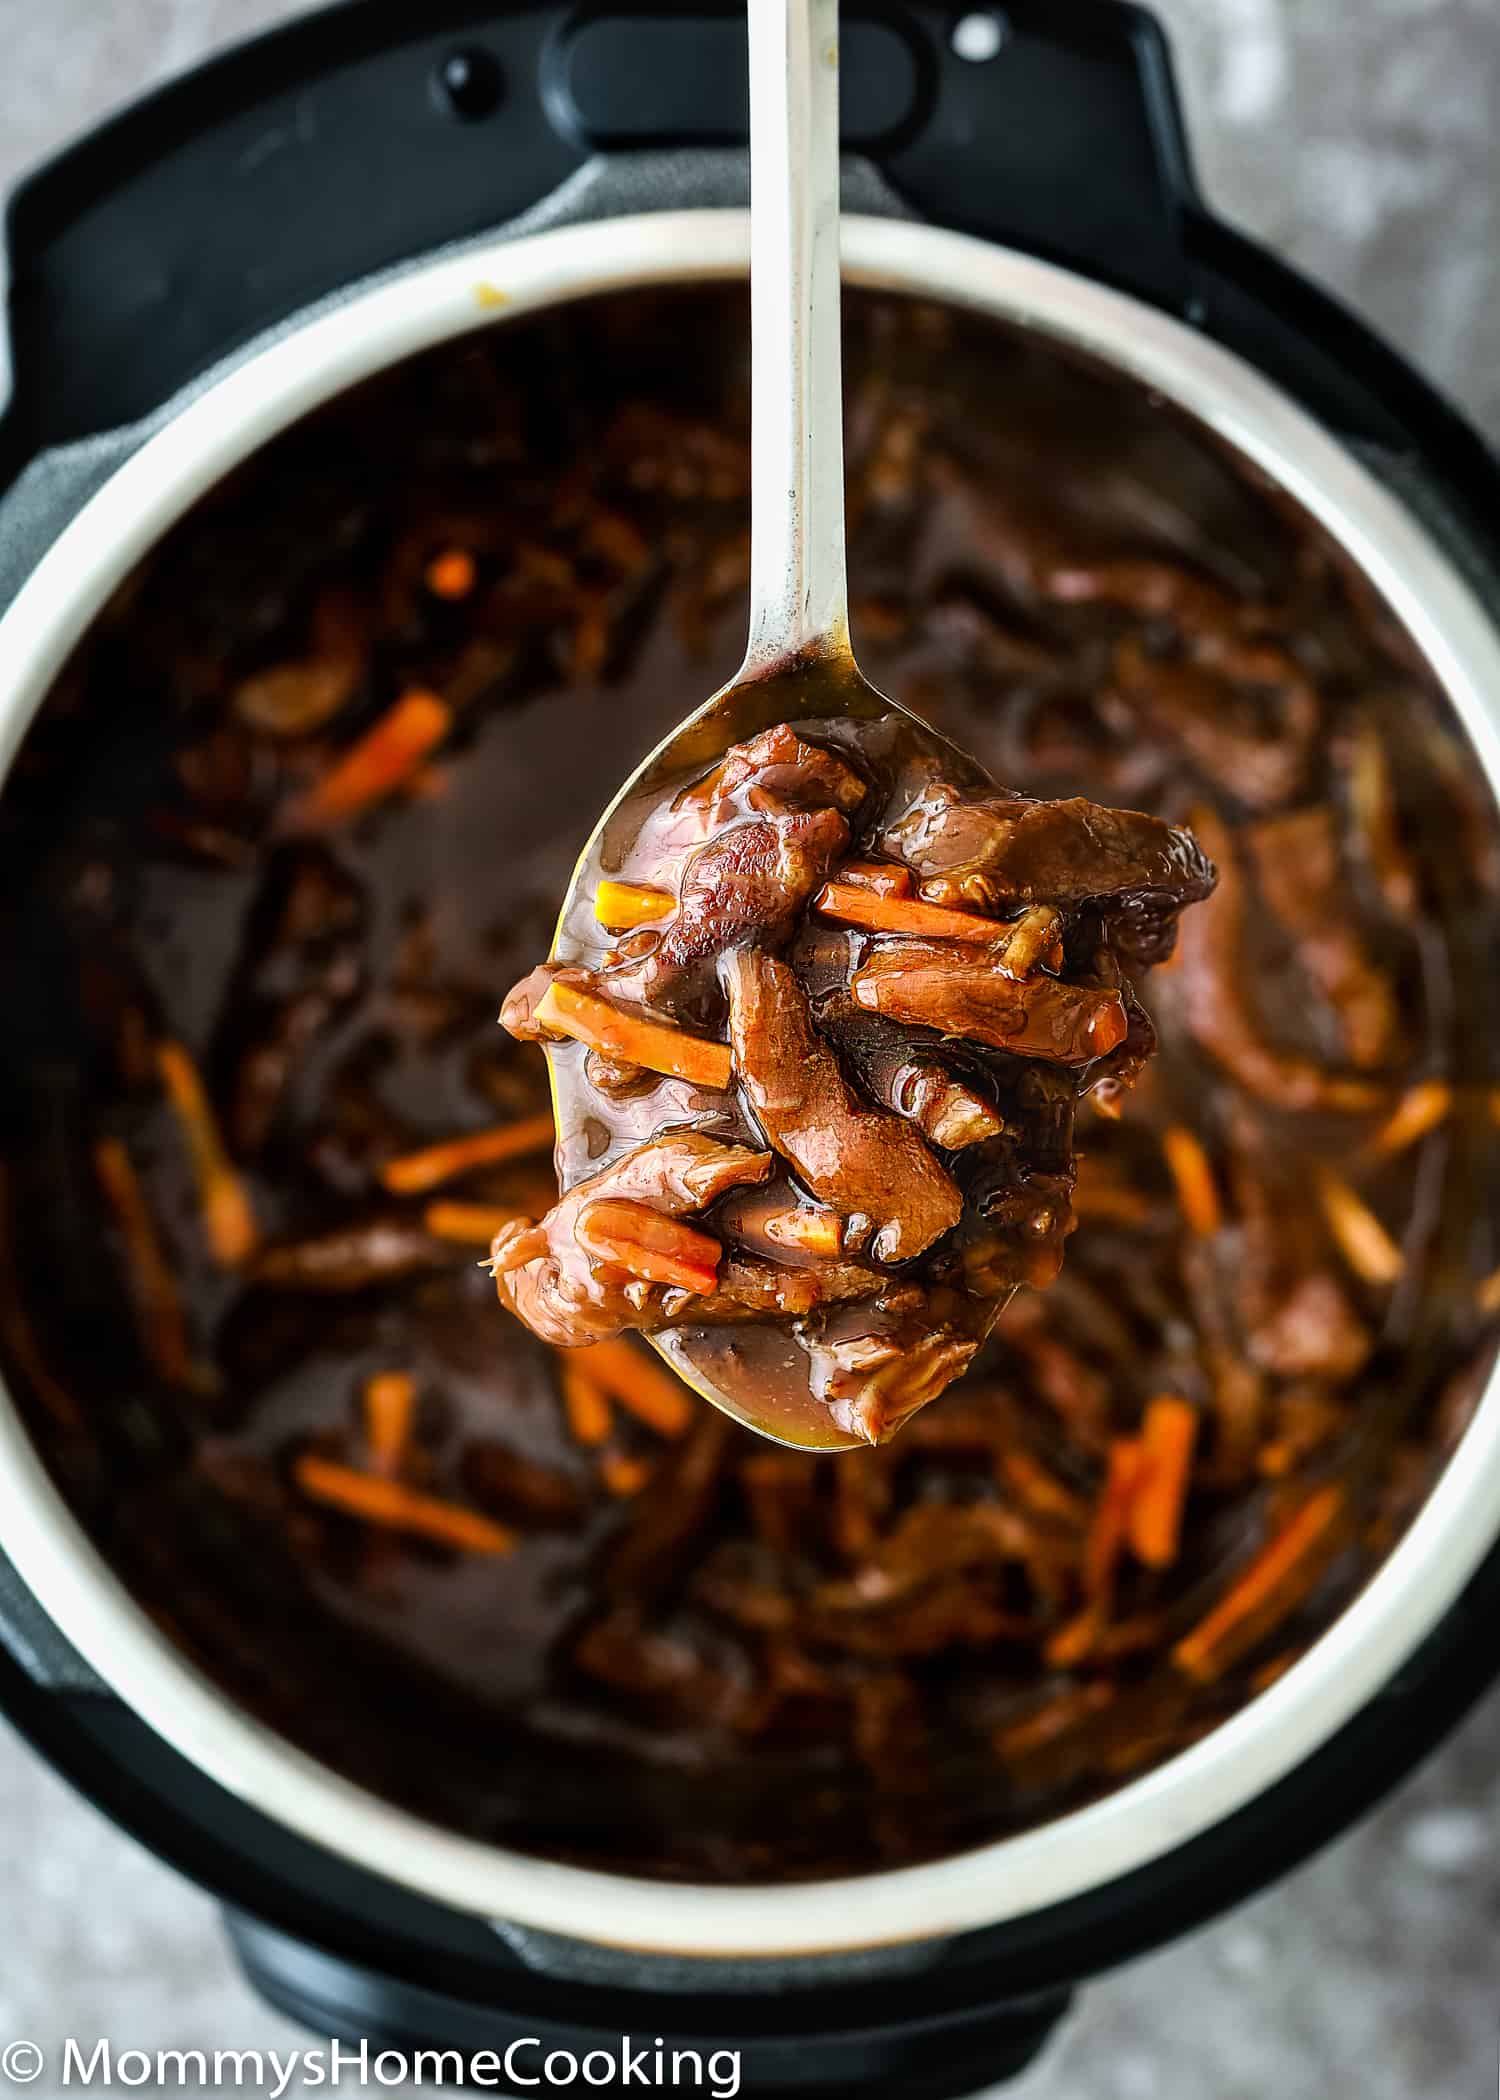 This Easy Instant Pot Mongolian Beef recipe is full of all the flavors you love from your favorite Chinese restaurant. Tender beef smothered in a super tasty sauce that is ready in 30 minutes or less. https://mommyshomecooking.com